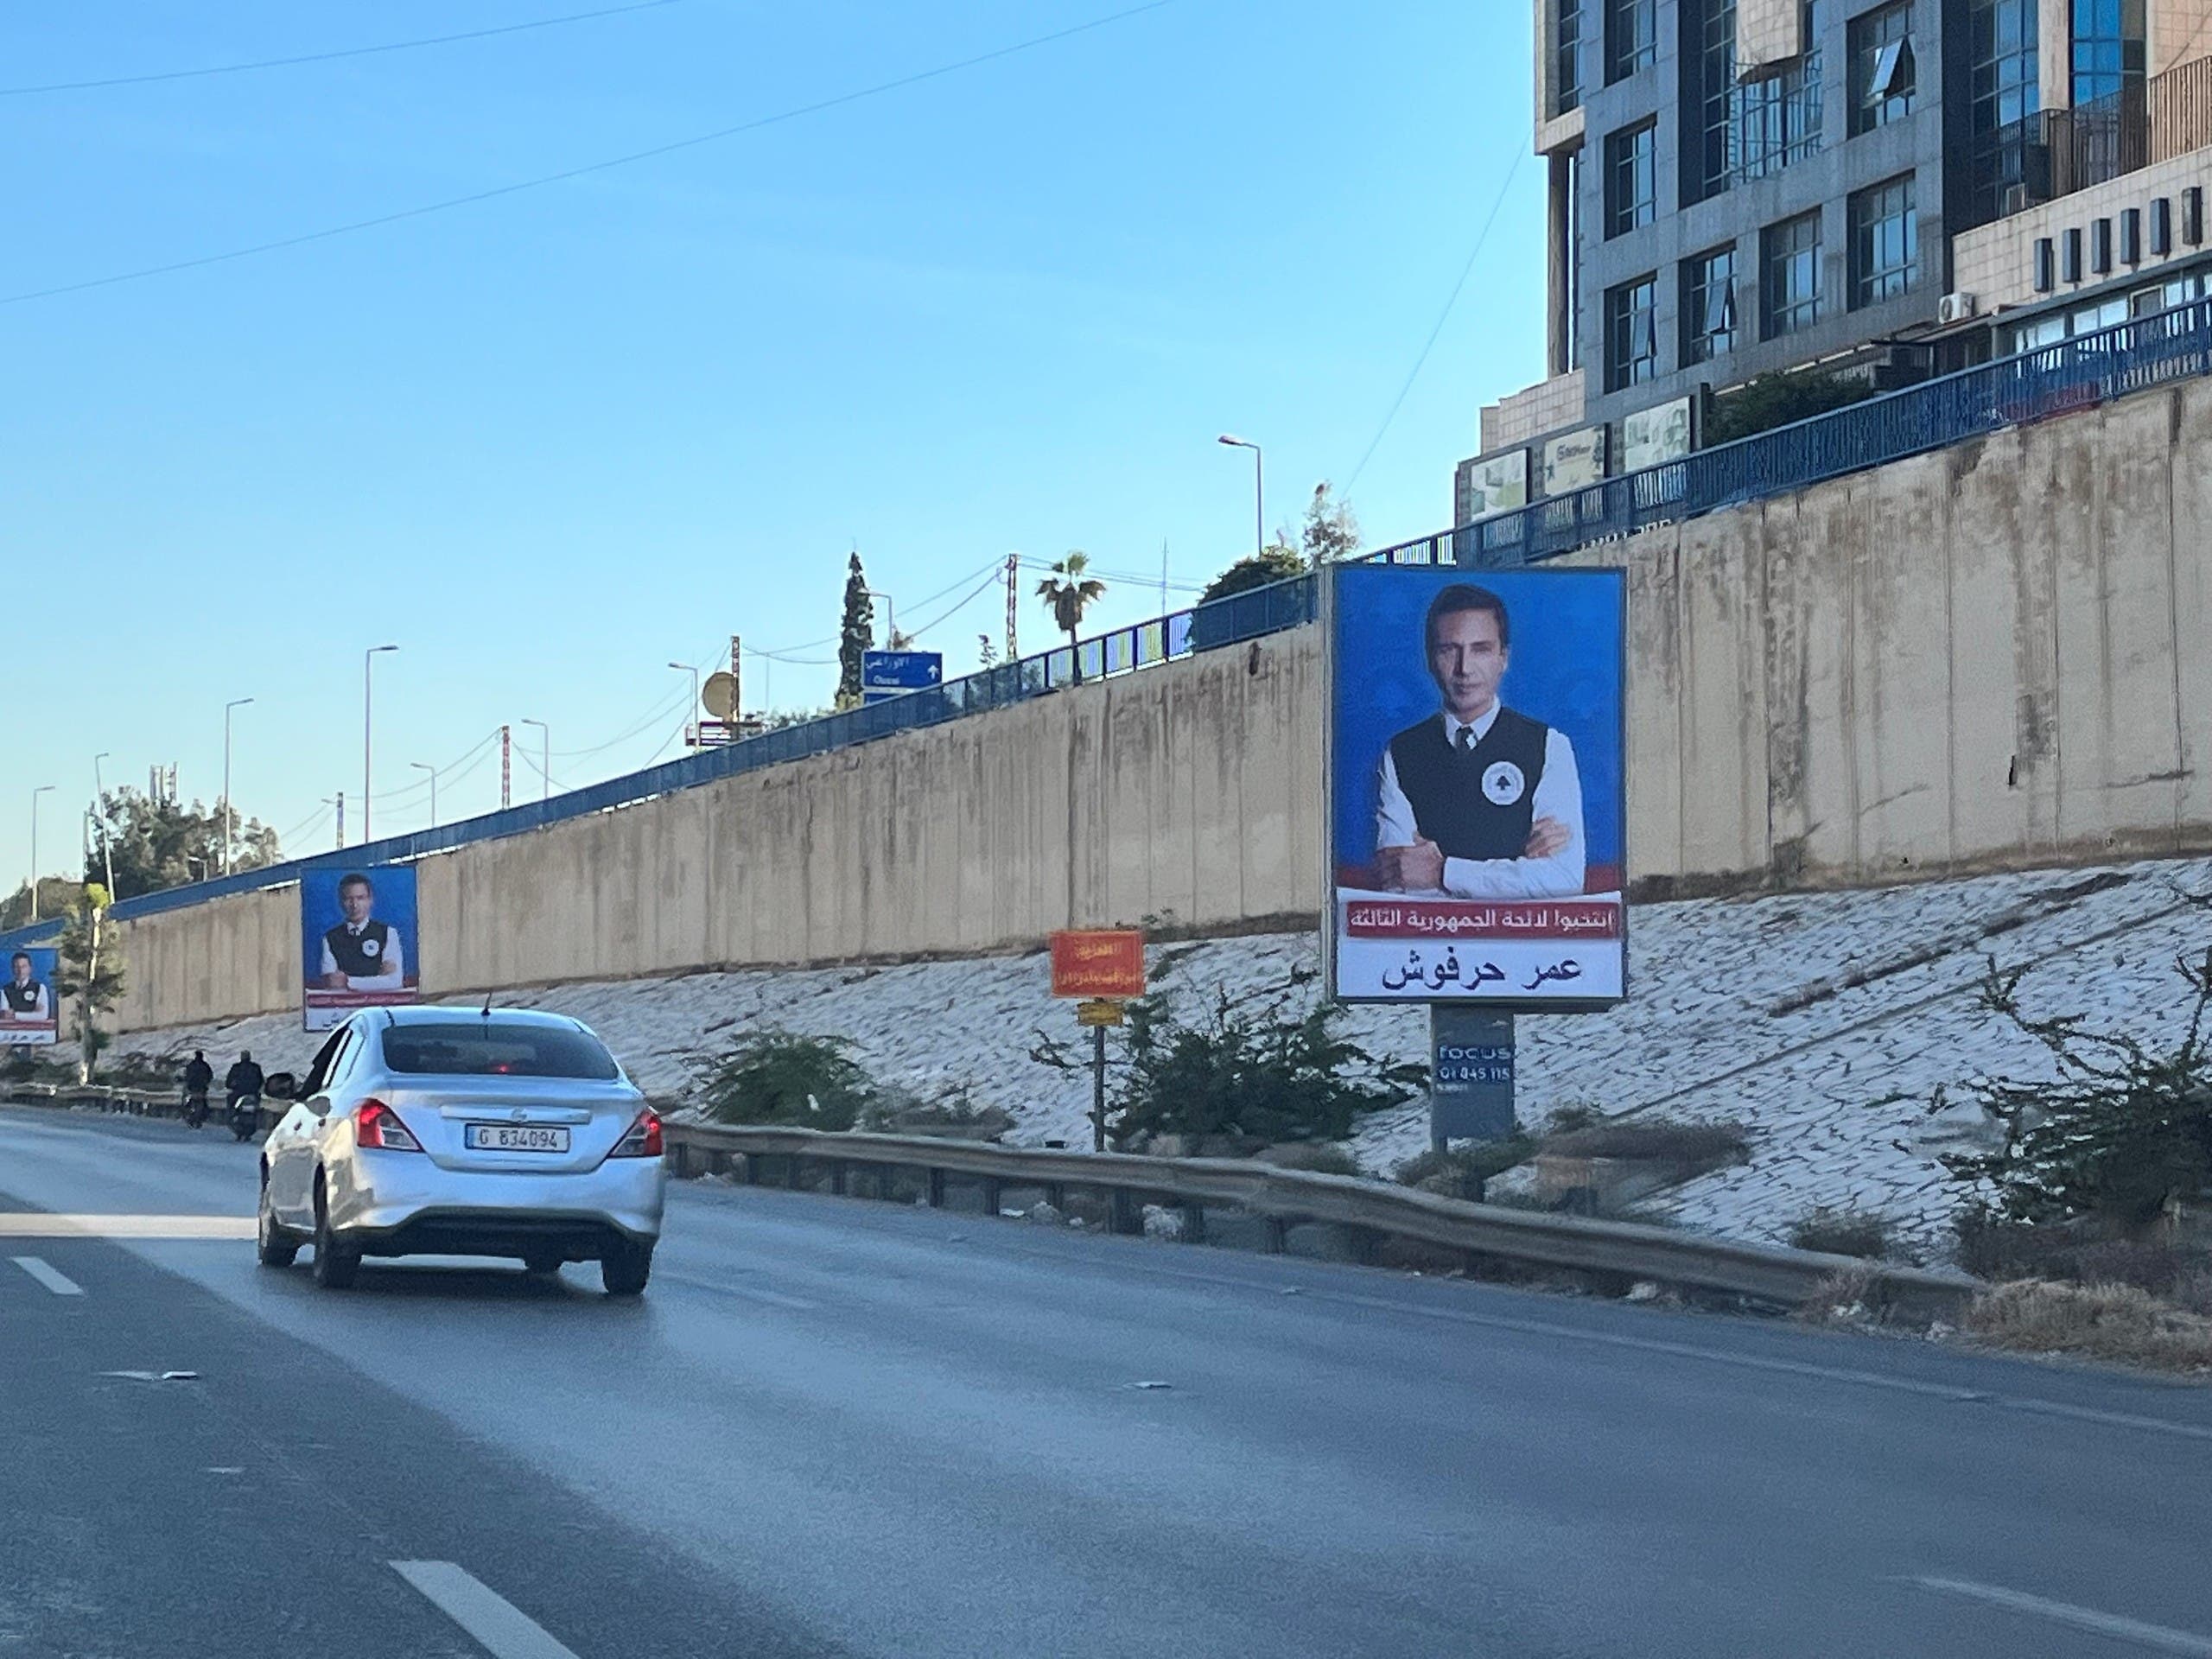 Despite enjoying much in the way of popular support, Lebanon's opposition parties have historically fared poorly at the ballot box, with voters often left uncertain about what these candidates stand for in policy or political direction. (Photo: Robert McKelvey)